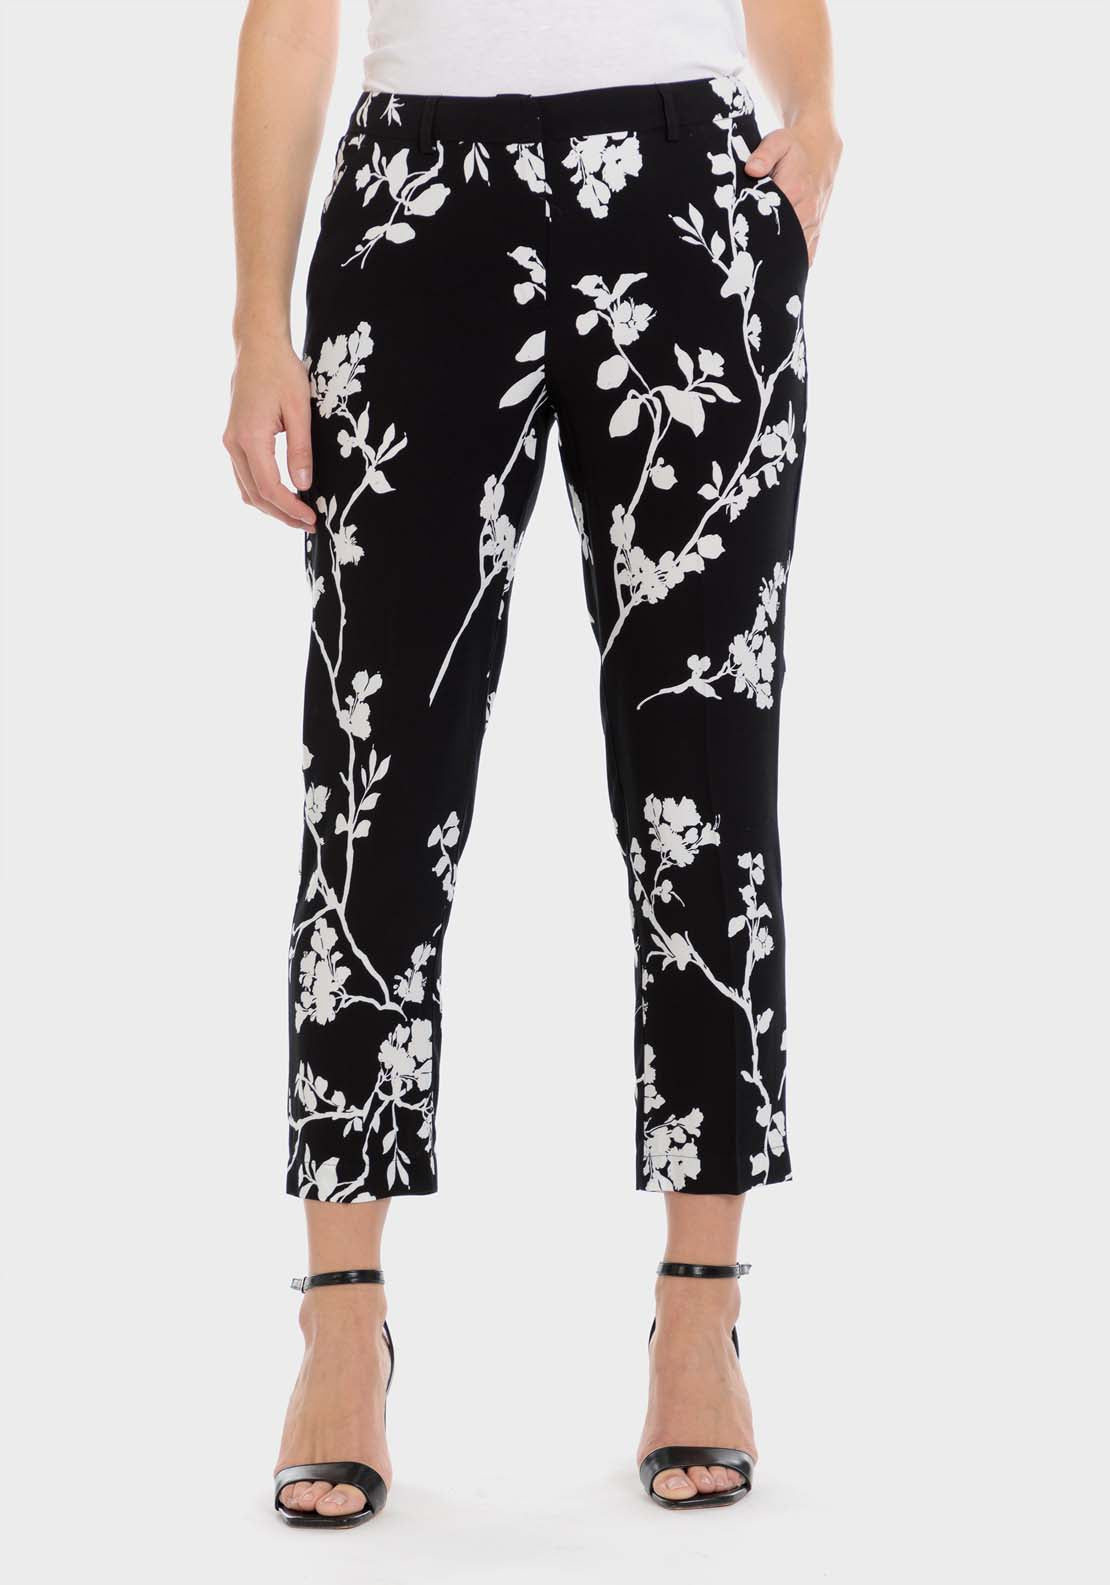 Punt Roma Floral Print Trousers - Black 1 Shaws Department Stores